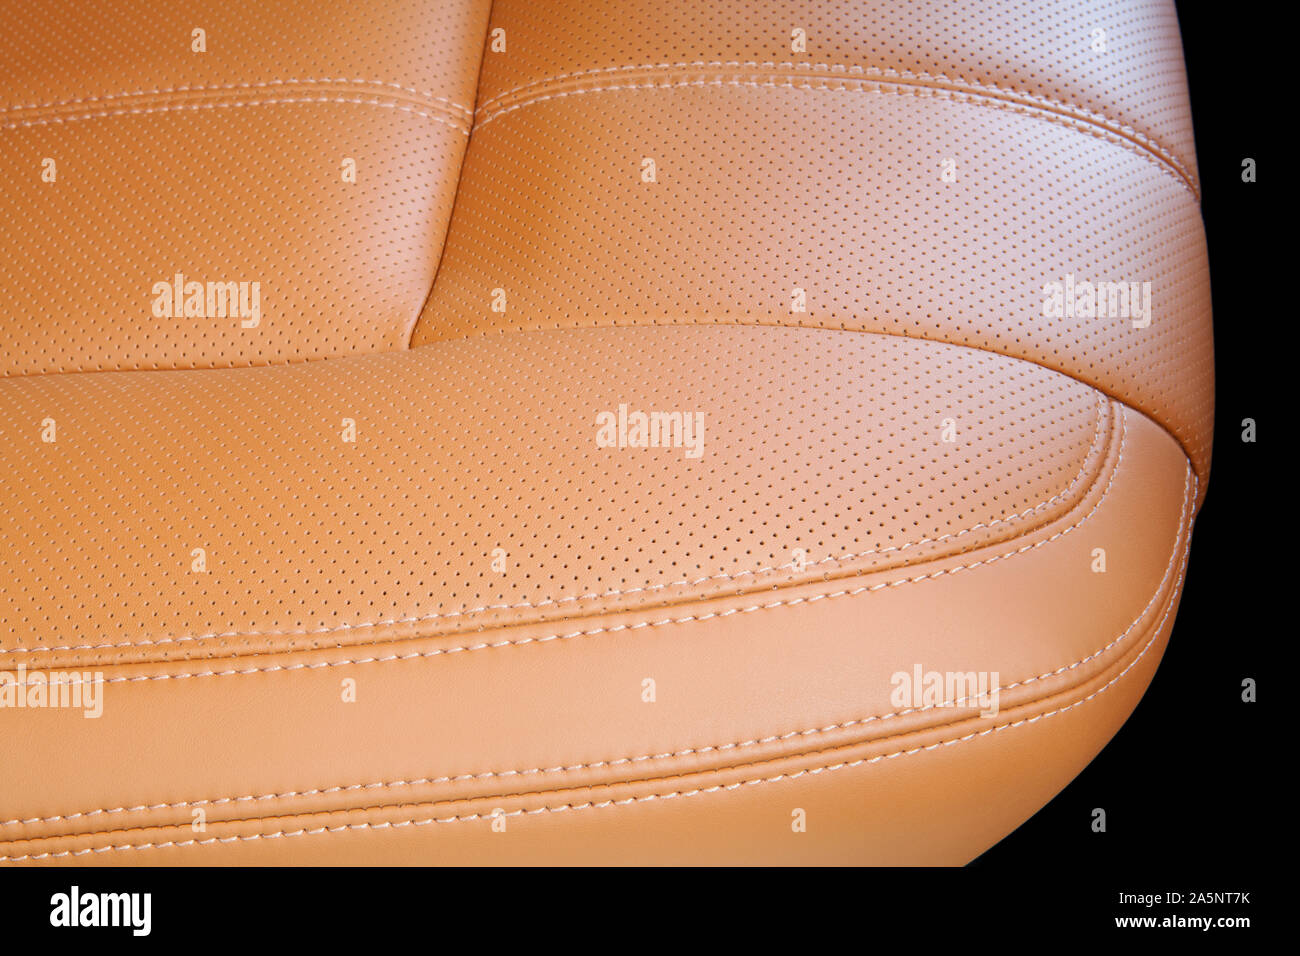 car seat in perforated leather Stock Photo